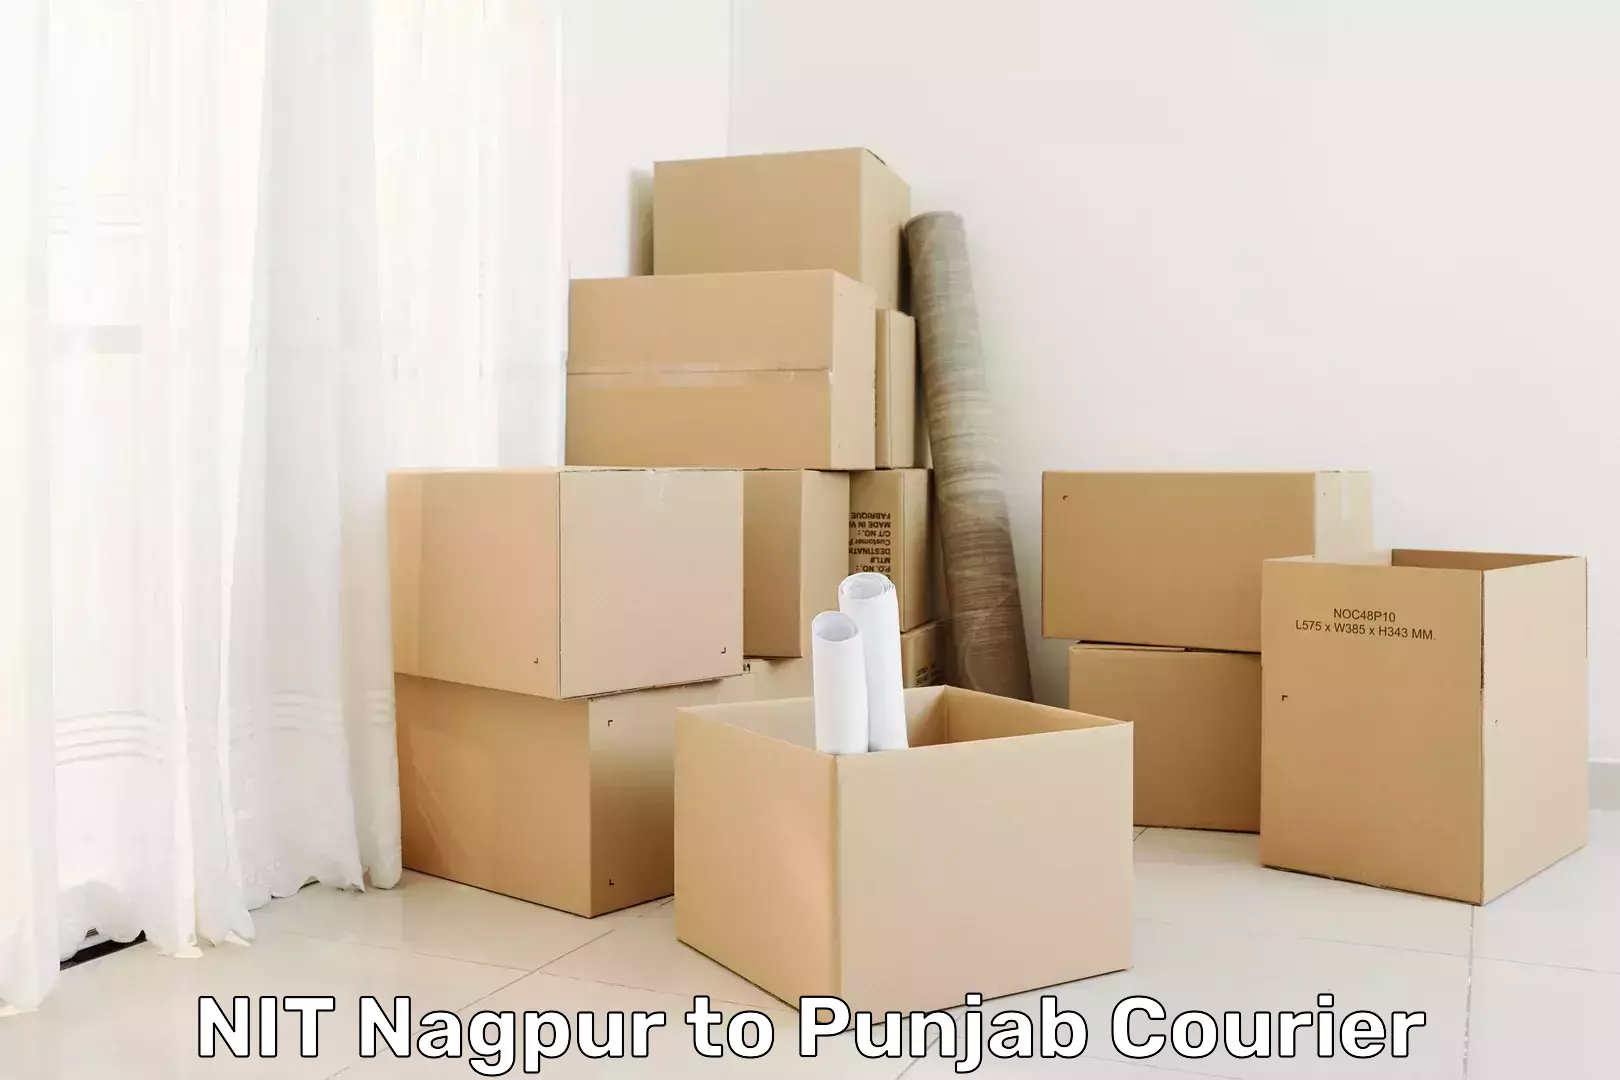 Package delivery network NIT Nagpur to Punjab